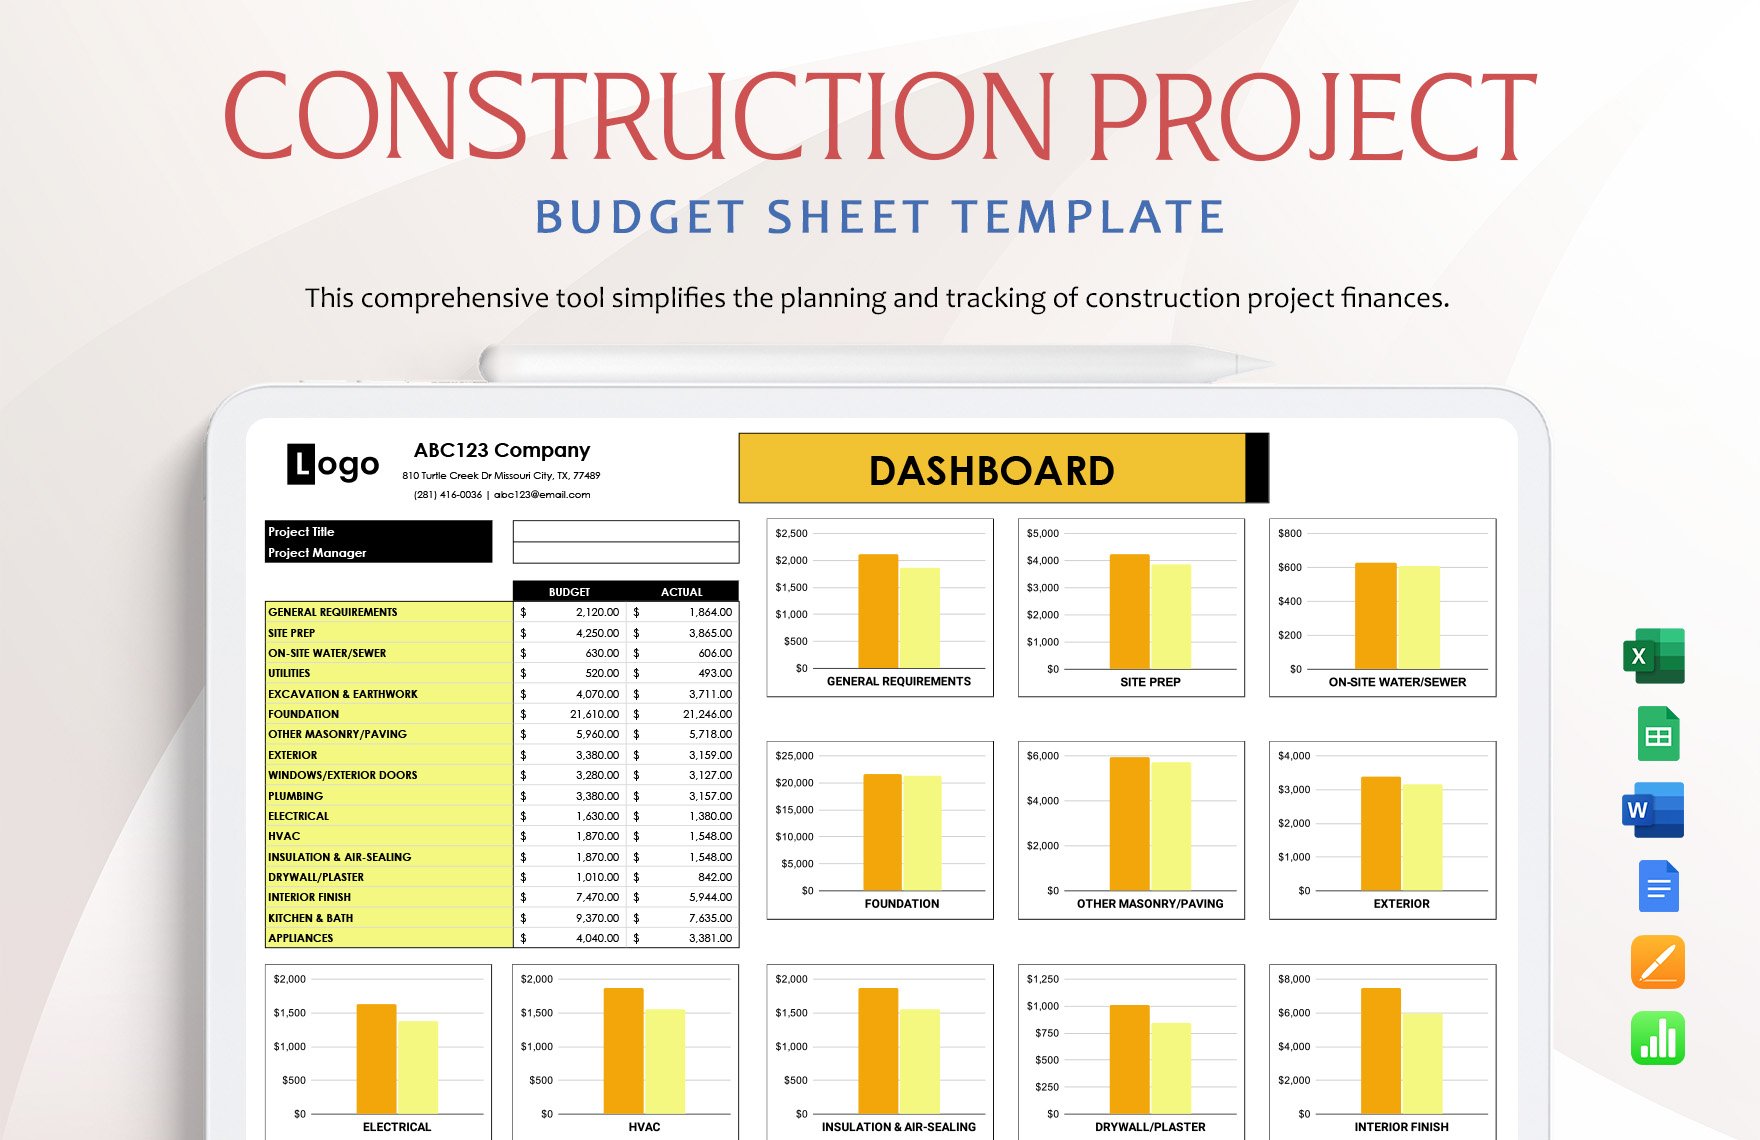 Construction Project Budget Sheet Template in Word, Google Docs, Excel, Google Sheets, Apple Pages, Apple Numbers